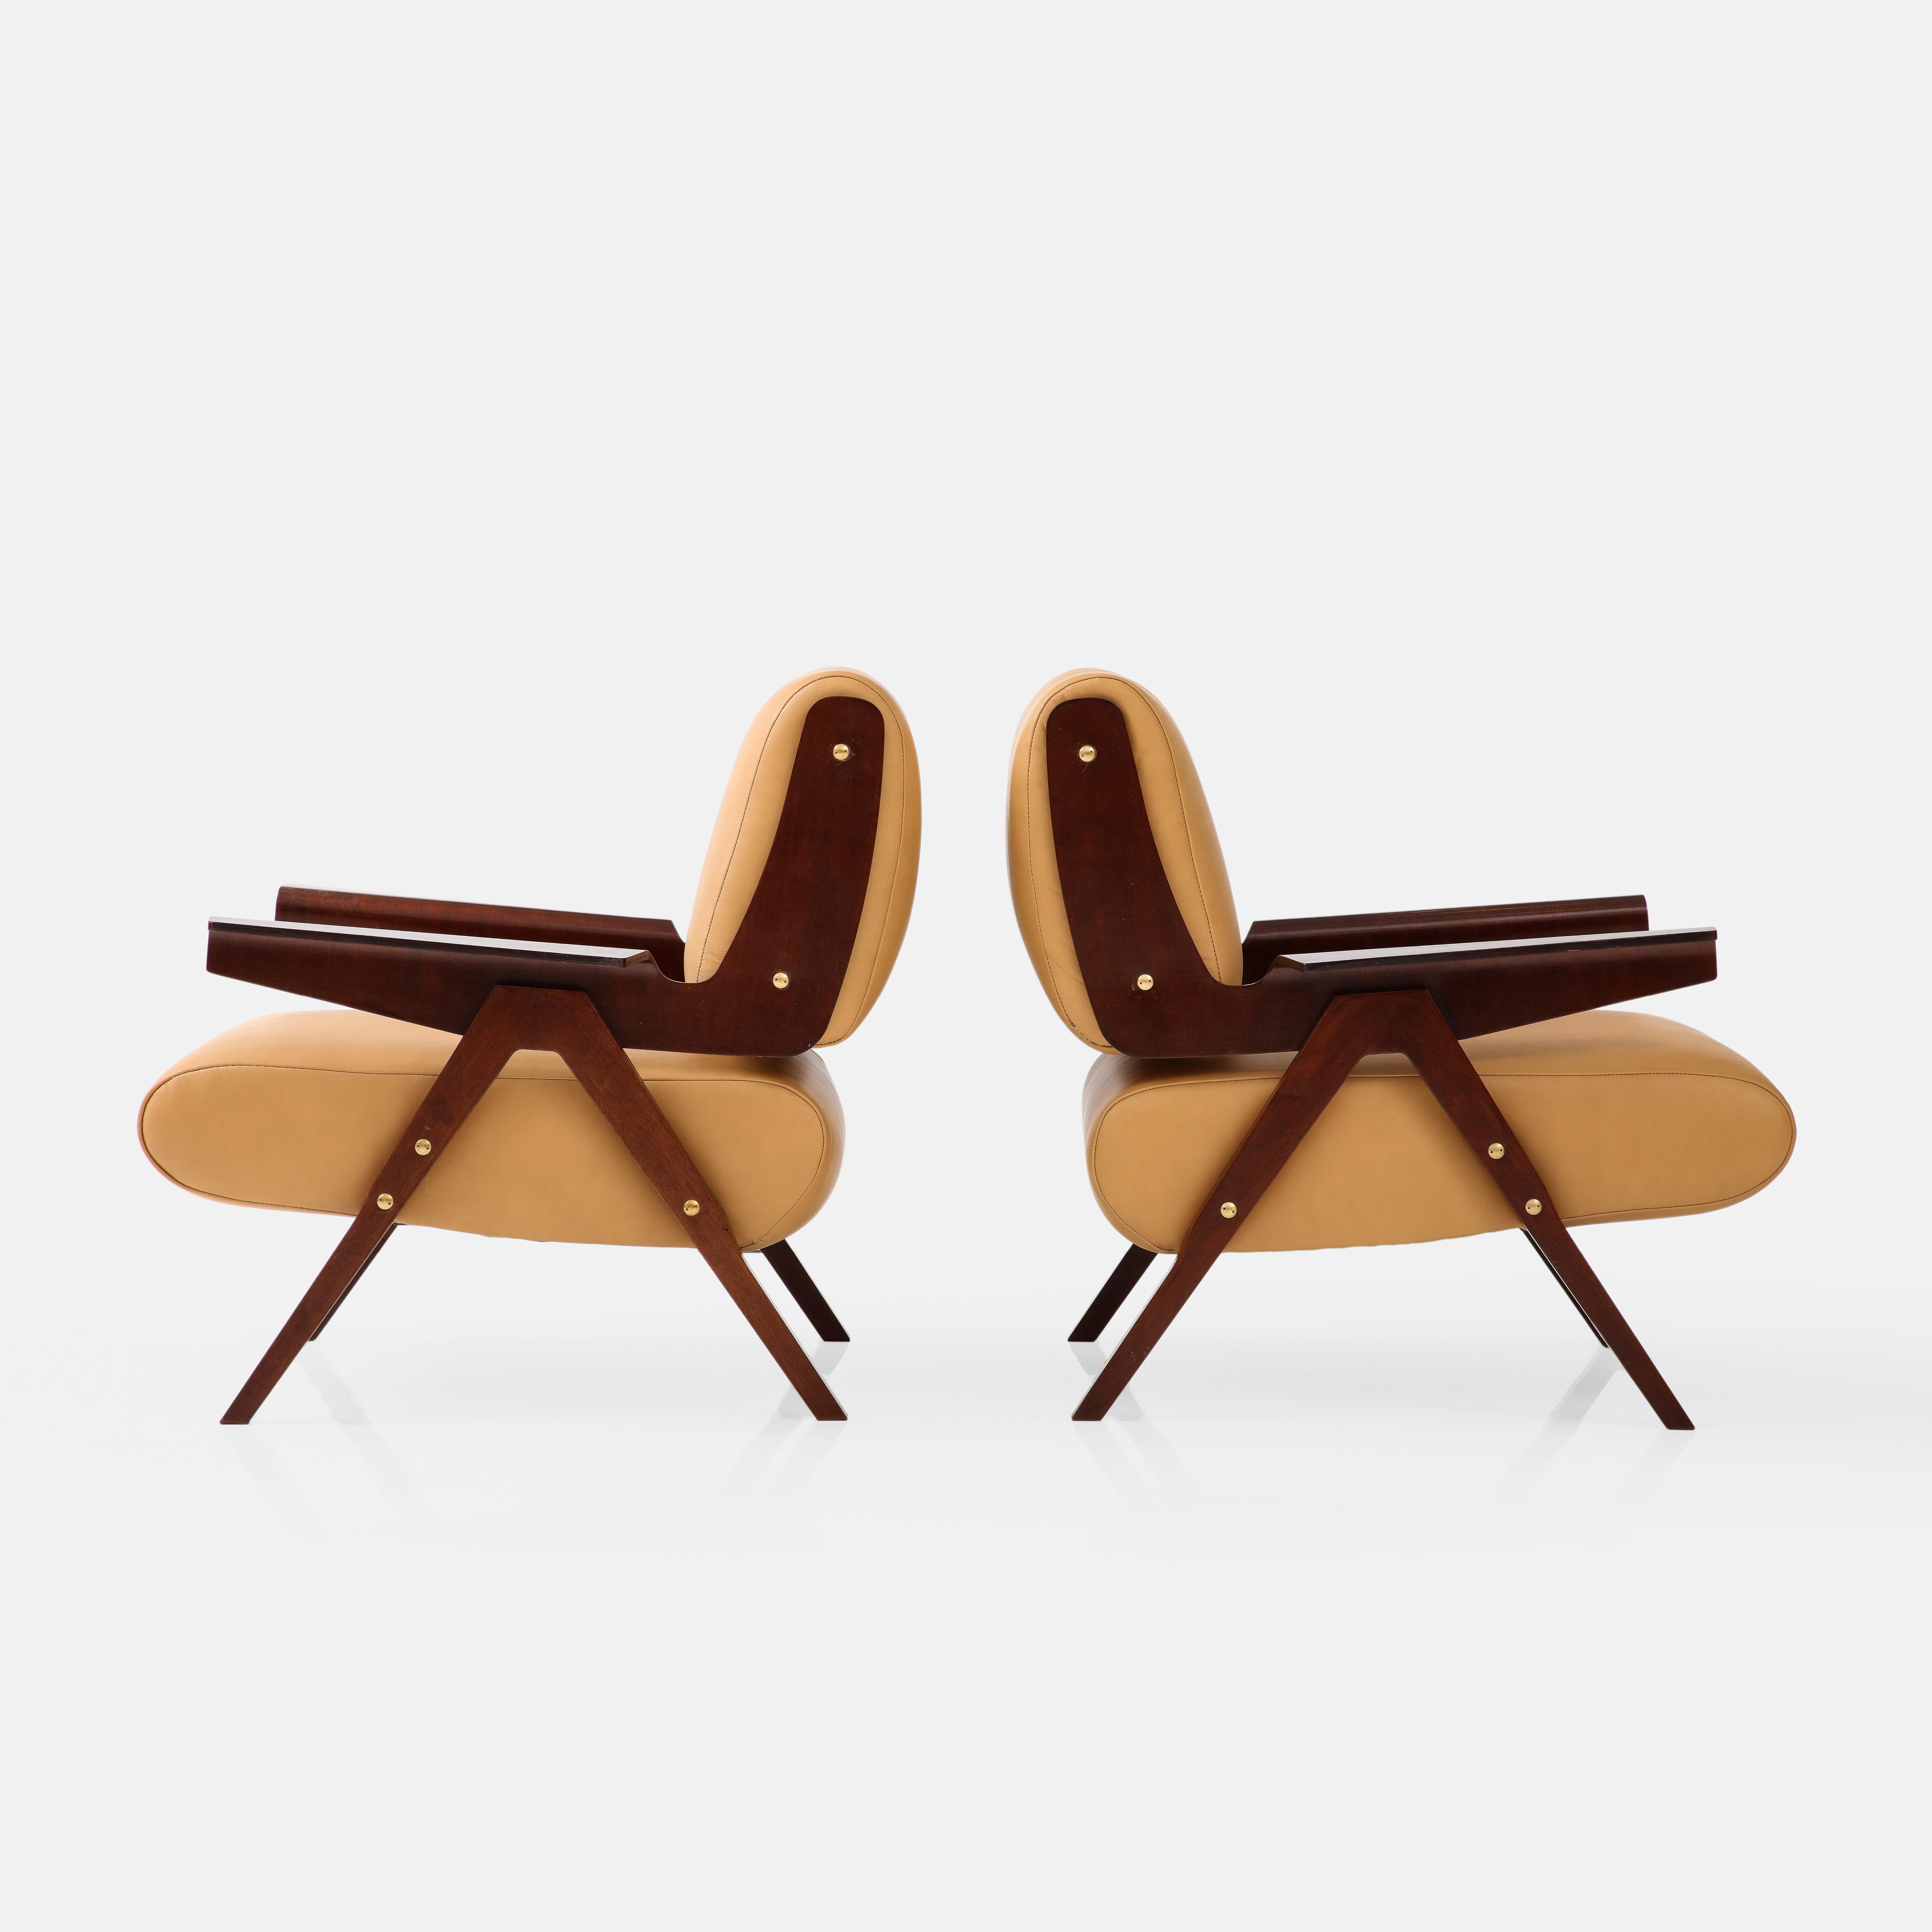 Veneer Gianfranco Frattini for Cassina Rare Pair of Mahogany Lounge Chairs Model 831 For Sale